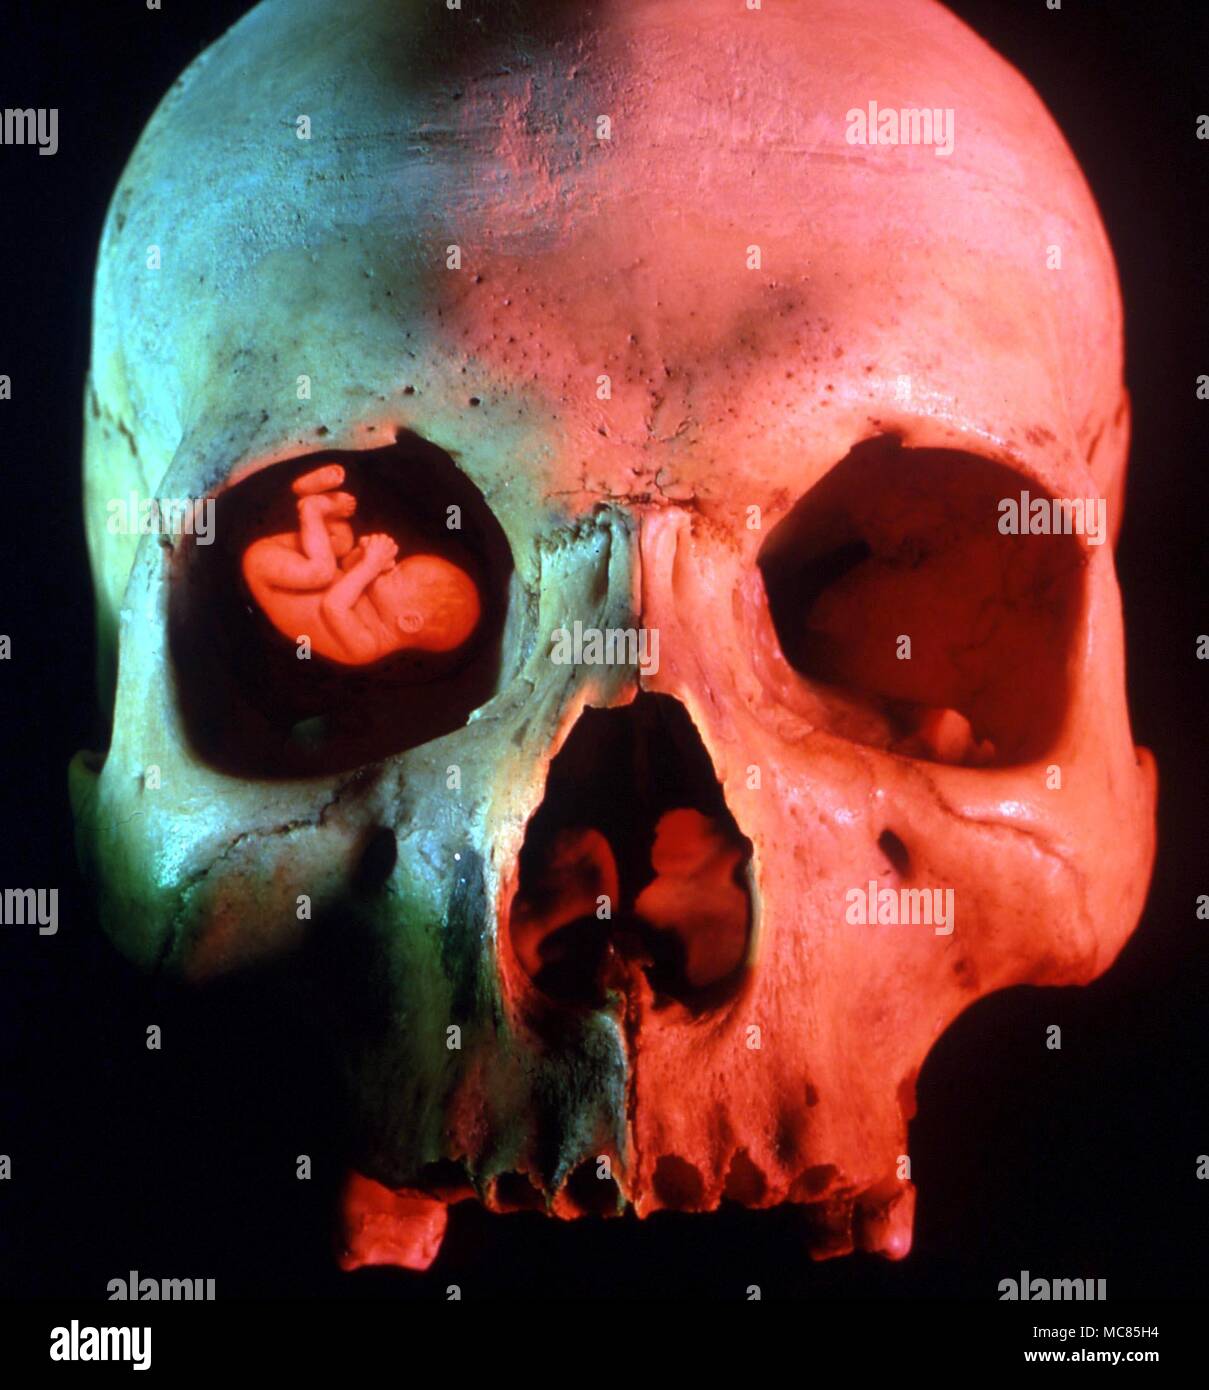 Fantasy. Embryo in eye-socket of skull, symbolizing the close connection between death and rebirth. Stock Photo